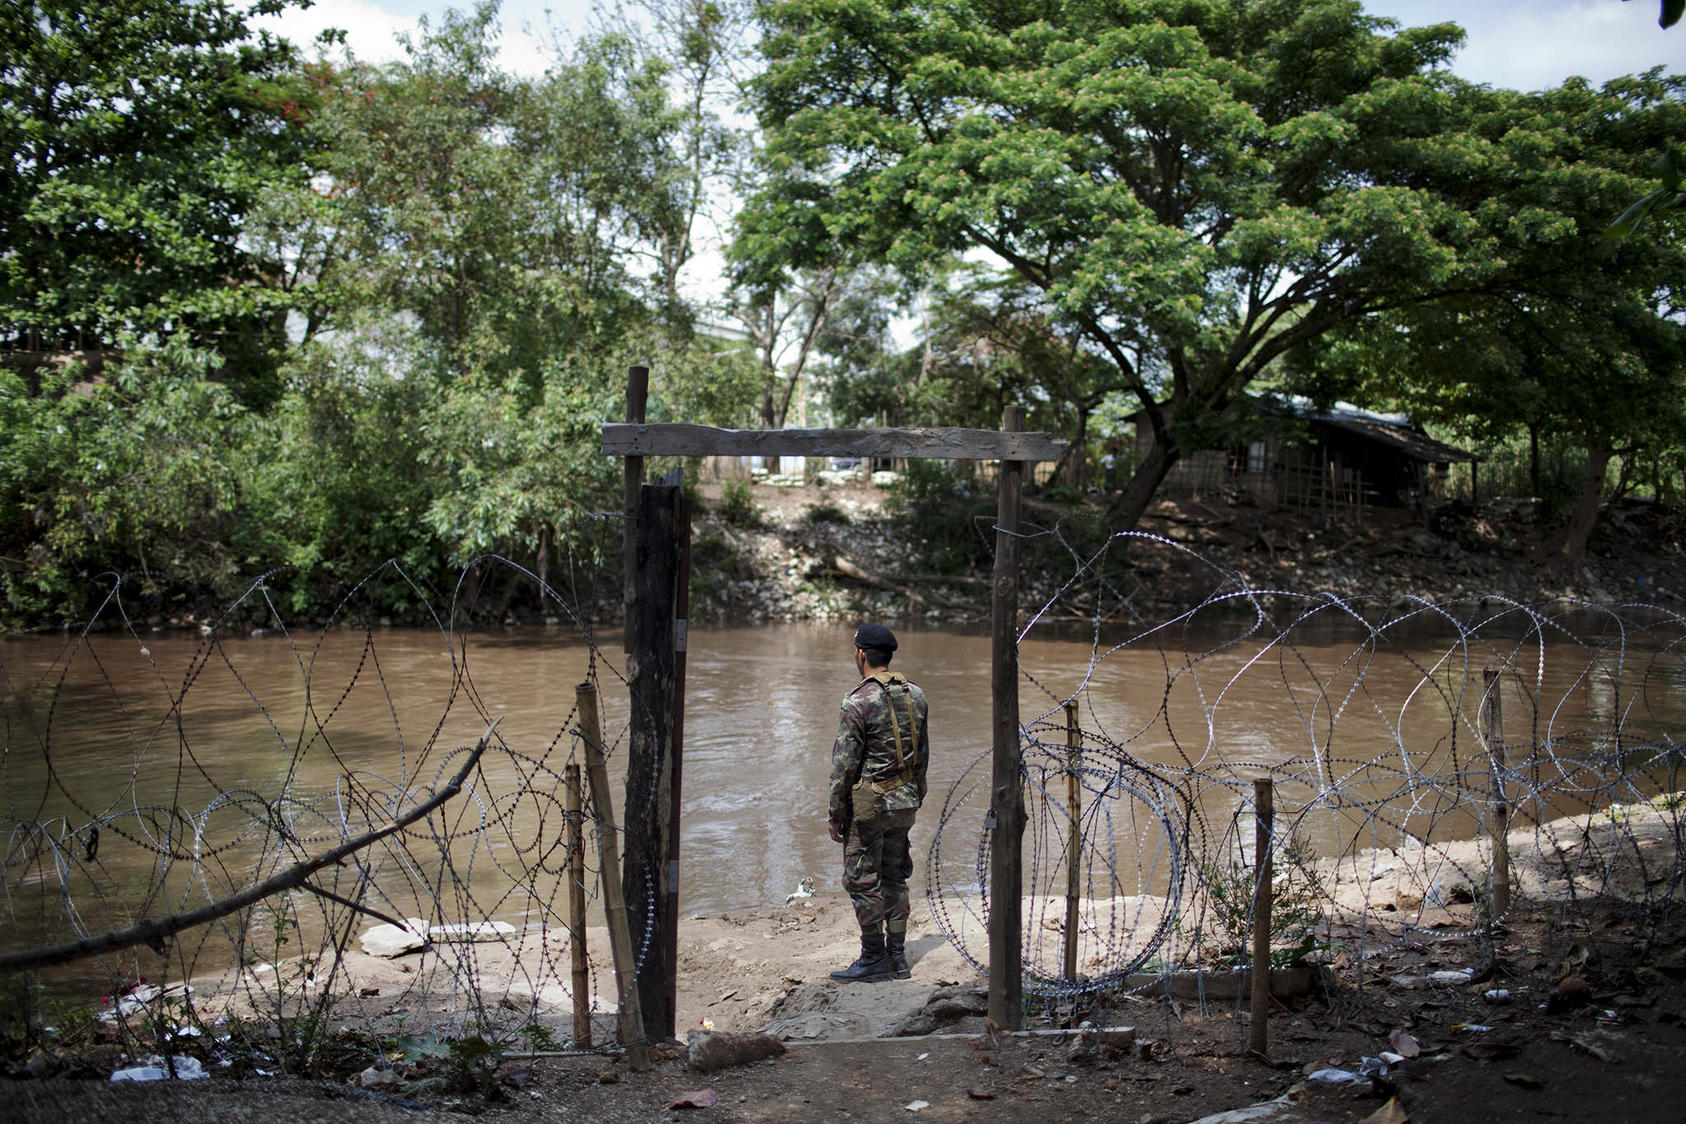 A soldier at a military checkpoint along the Sai River, which borders Myanmar, in Mae Sai, Thailand, May 9, 2012. (Giulio Di Sturco/International Herald Tribune)